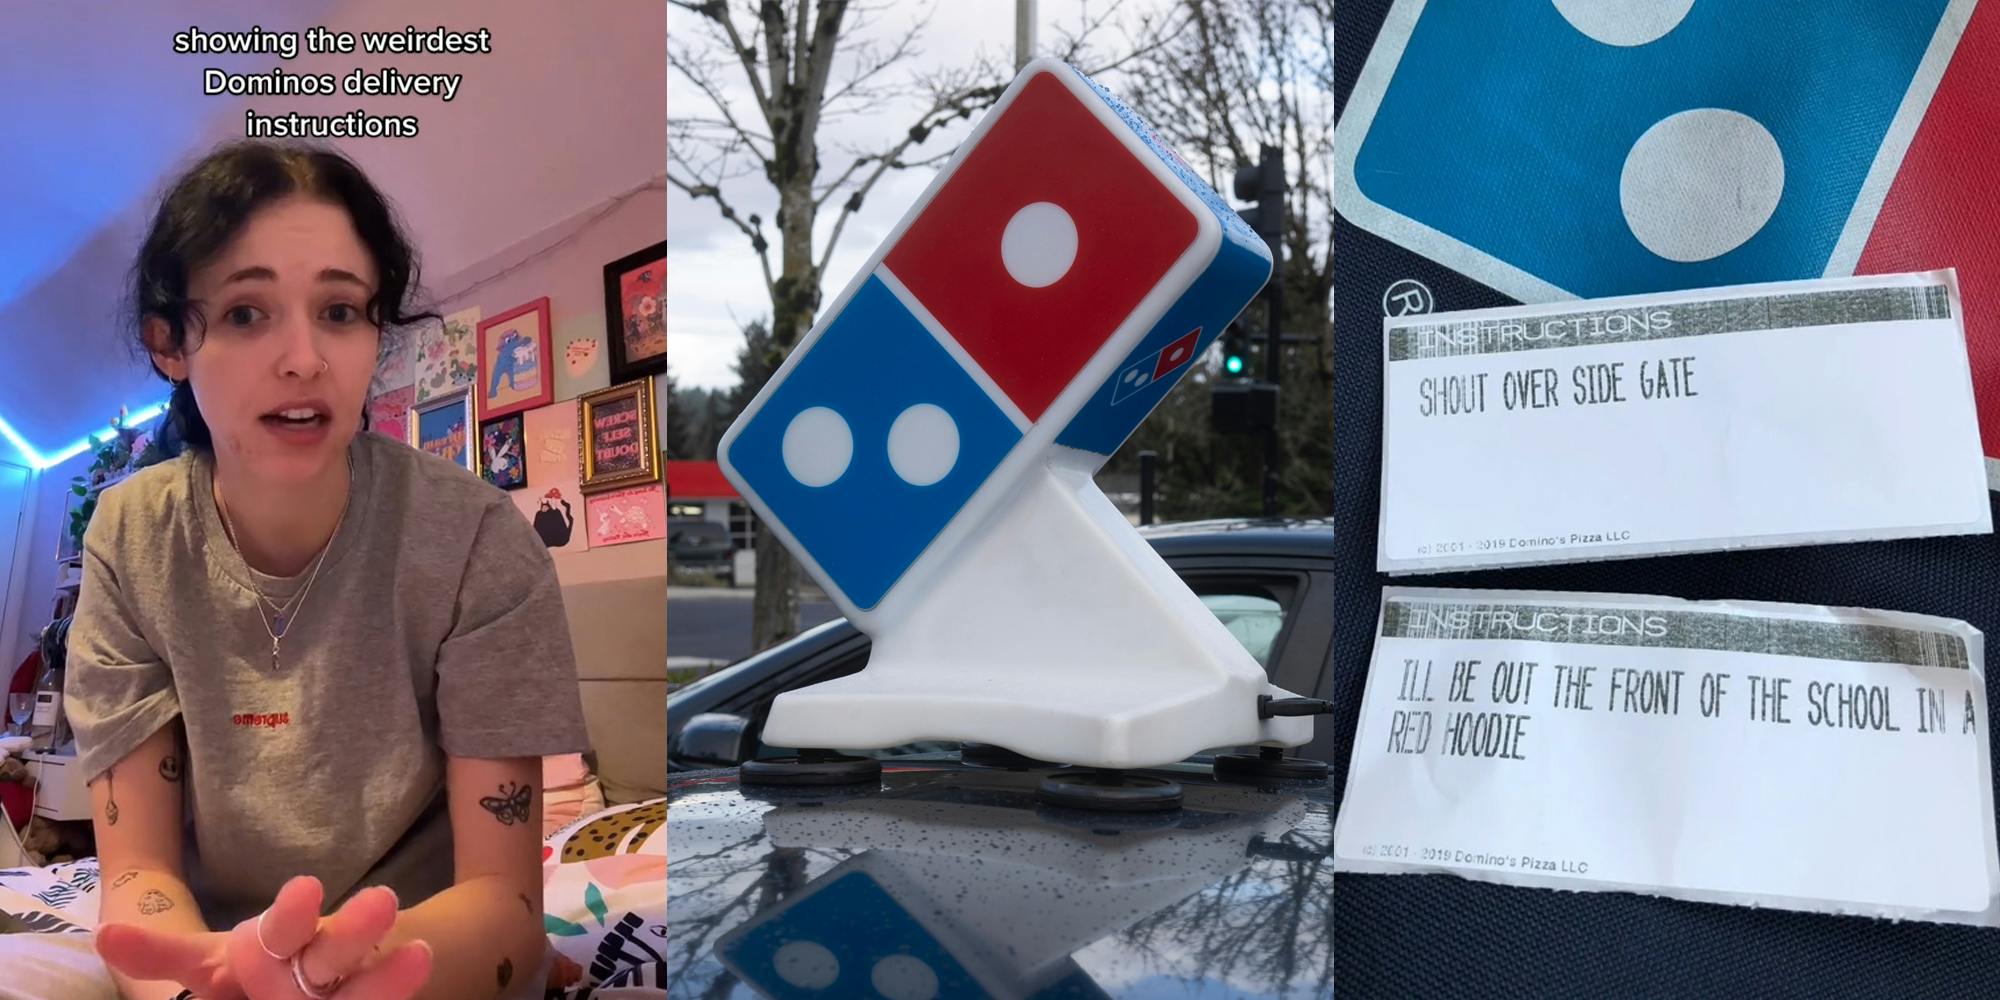 Domino's employee speaking caption "showing the weirdest Dominos delivery instructions" (l) Domino's delivery car topper (c) delivery instructions on small papers "SHOUT OVER SIDE GATE" "ILL BE OUT THE FRONT OF THE SCHOOL IN A RED HOODIE" (r)